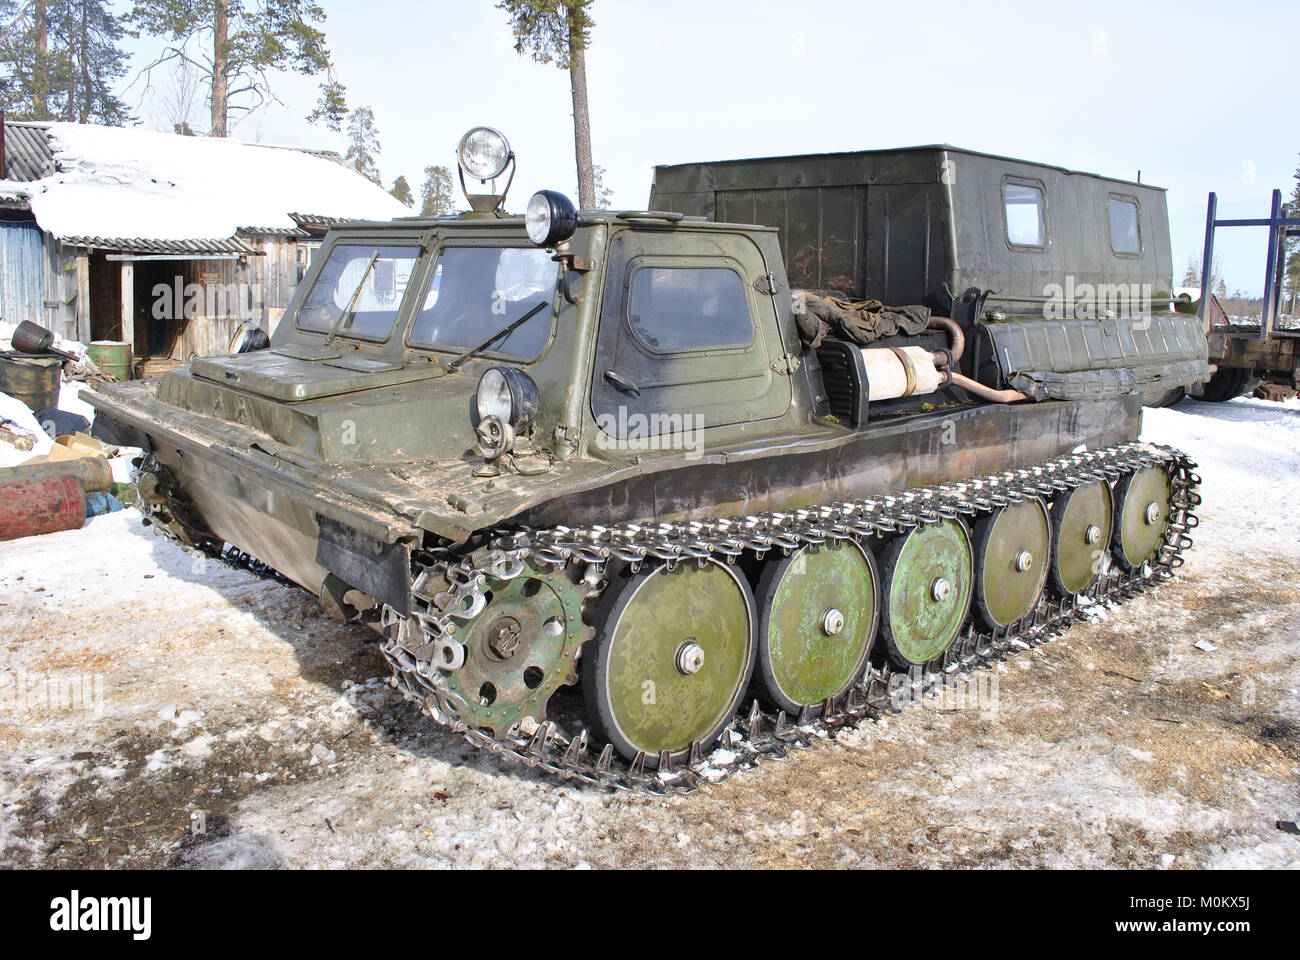 Crawler-vehicle. Cross-country vehicle for geological exploration. Russia, the Arctic Stock Photo